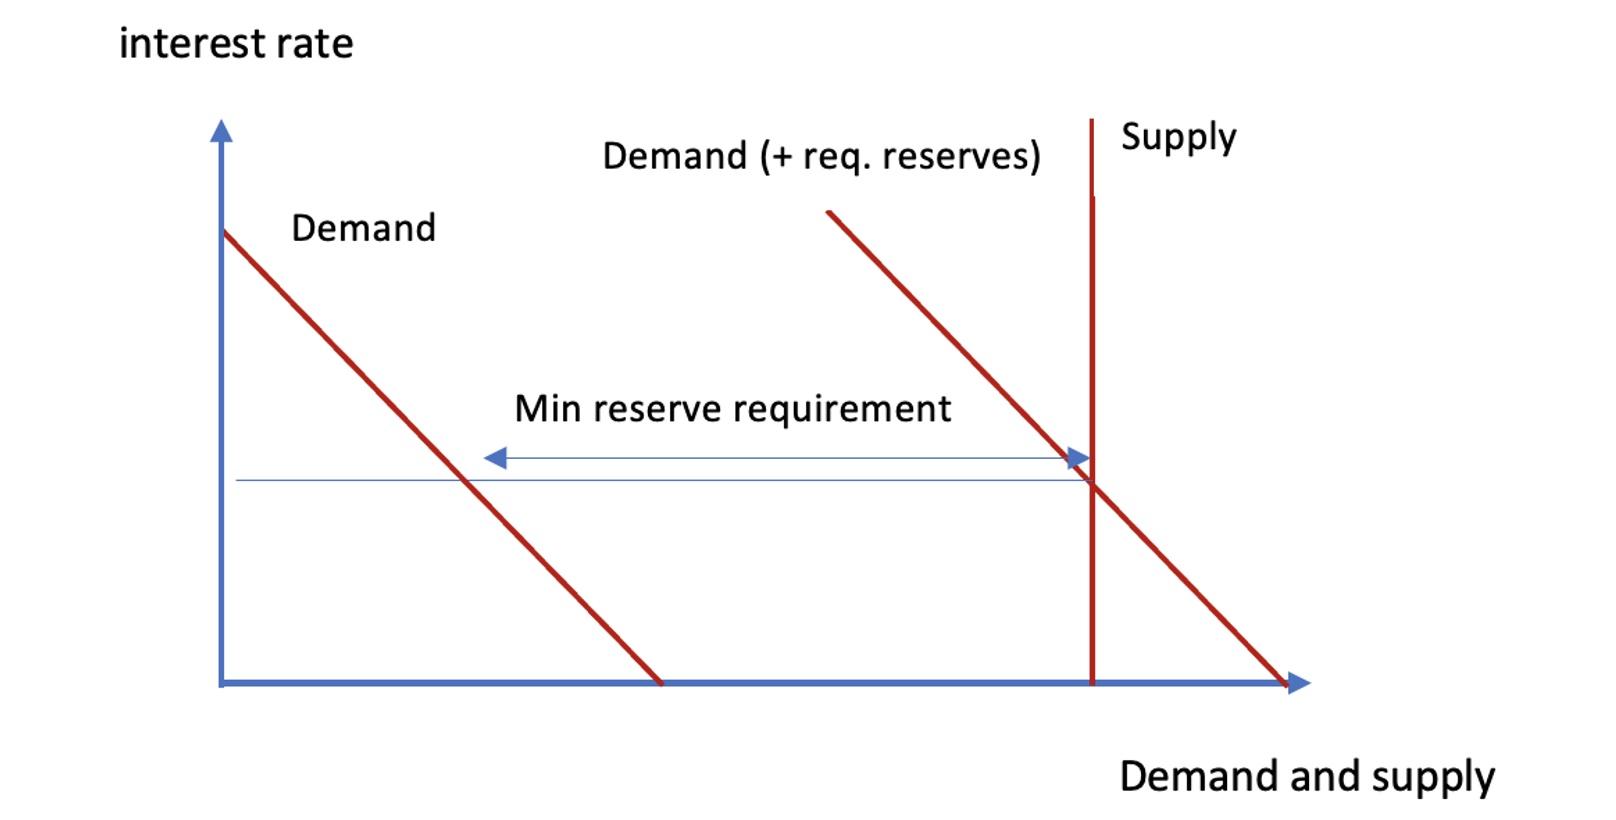 Figure 3 Demand and supply of reserves with reserve requirement: No remuneration